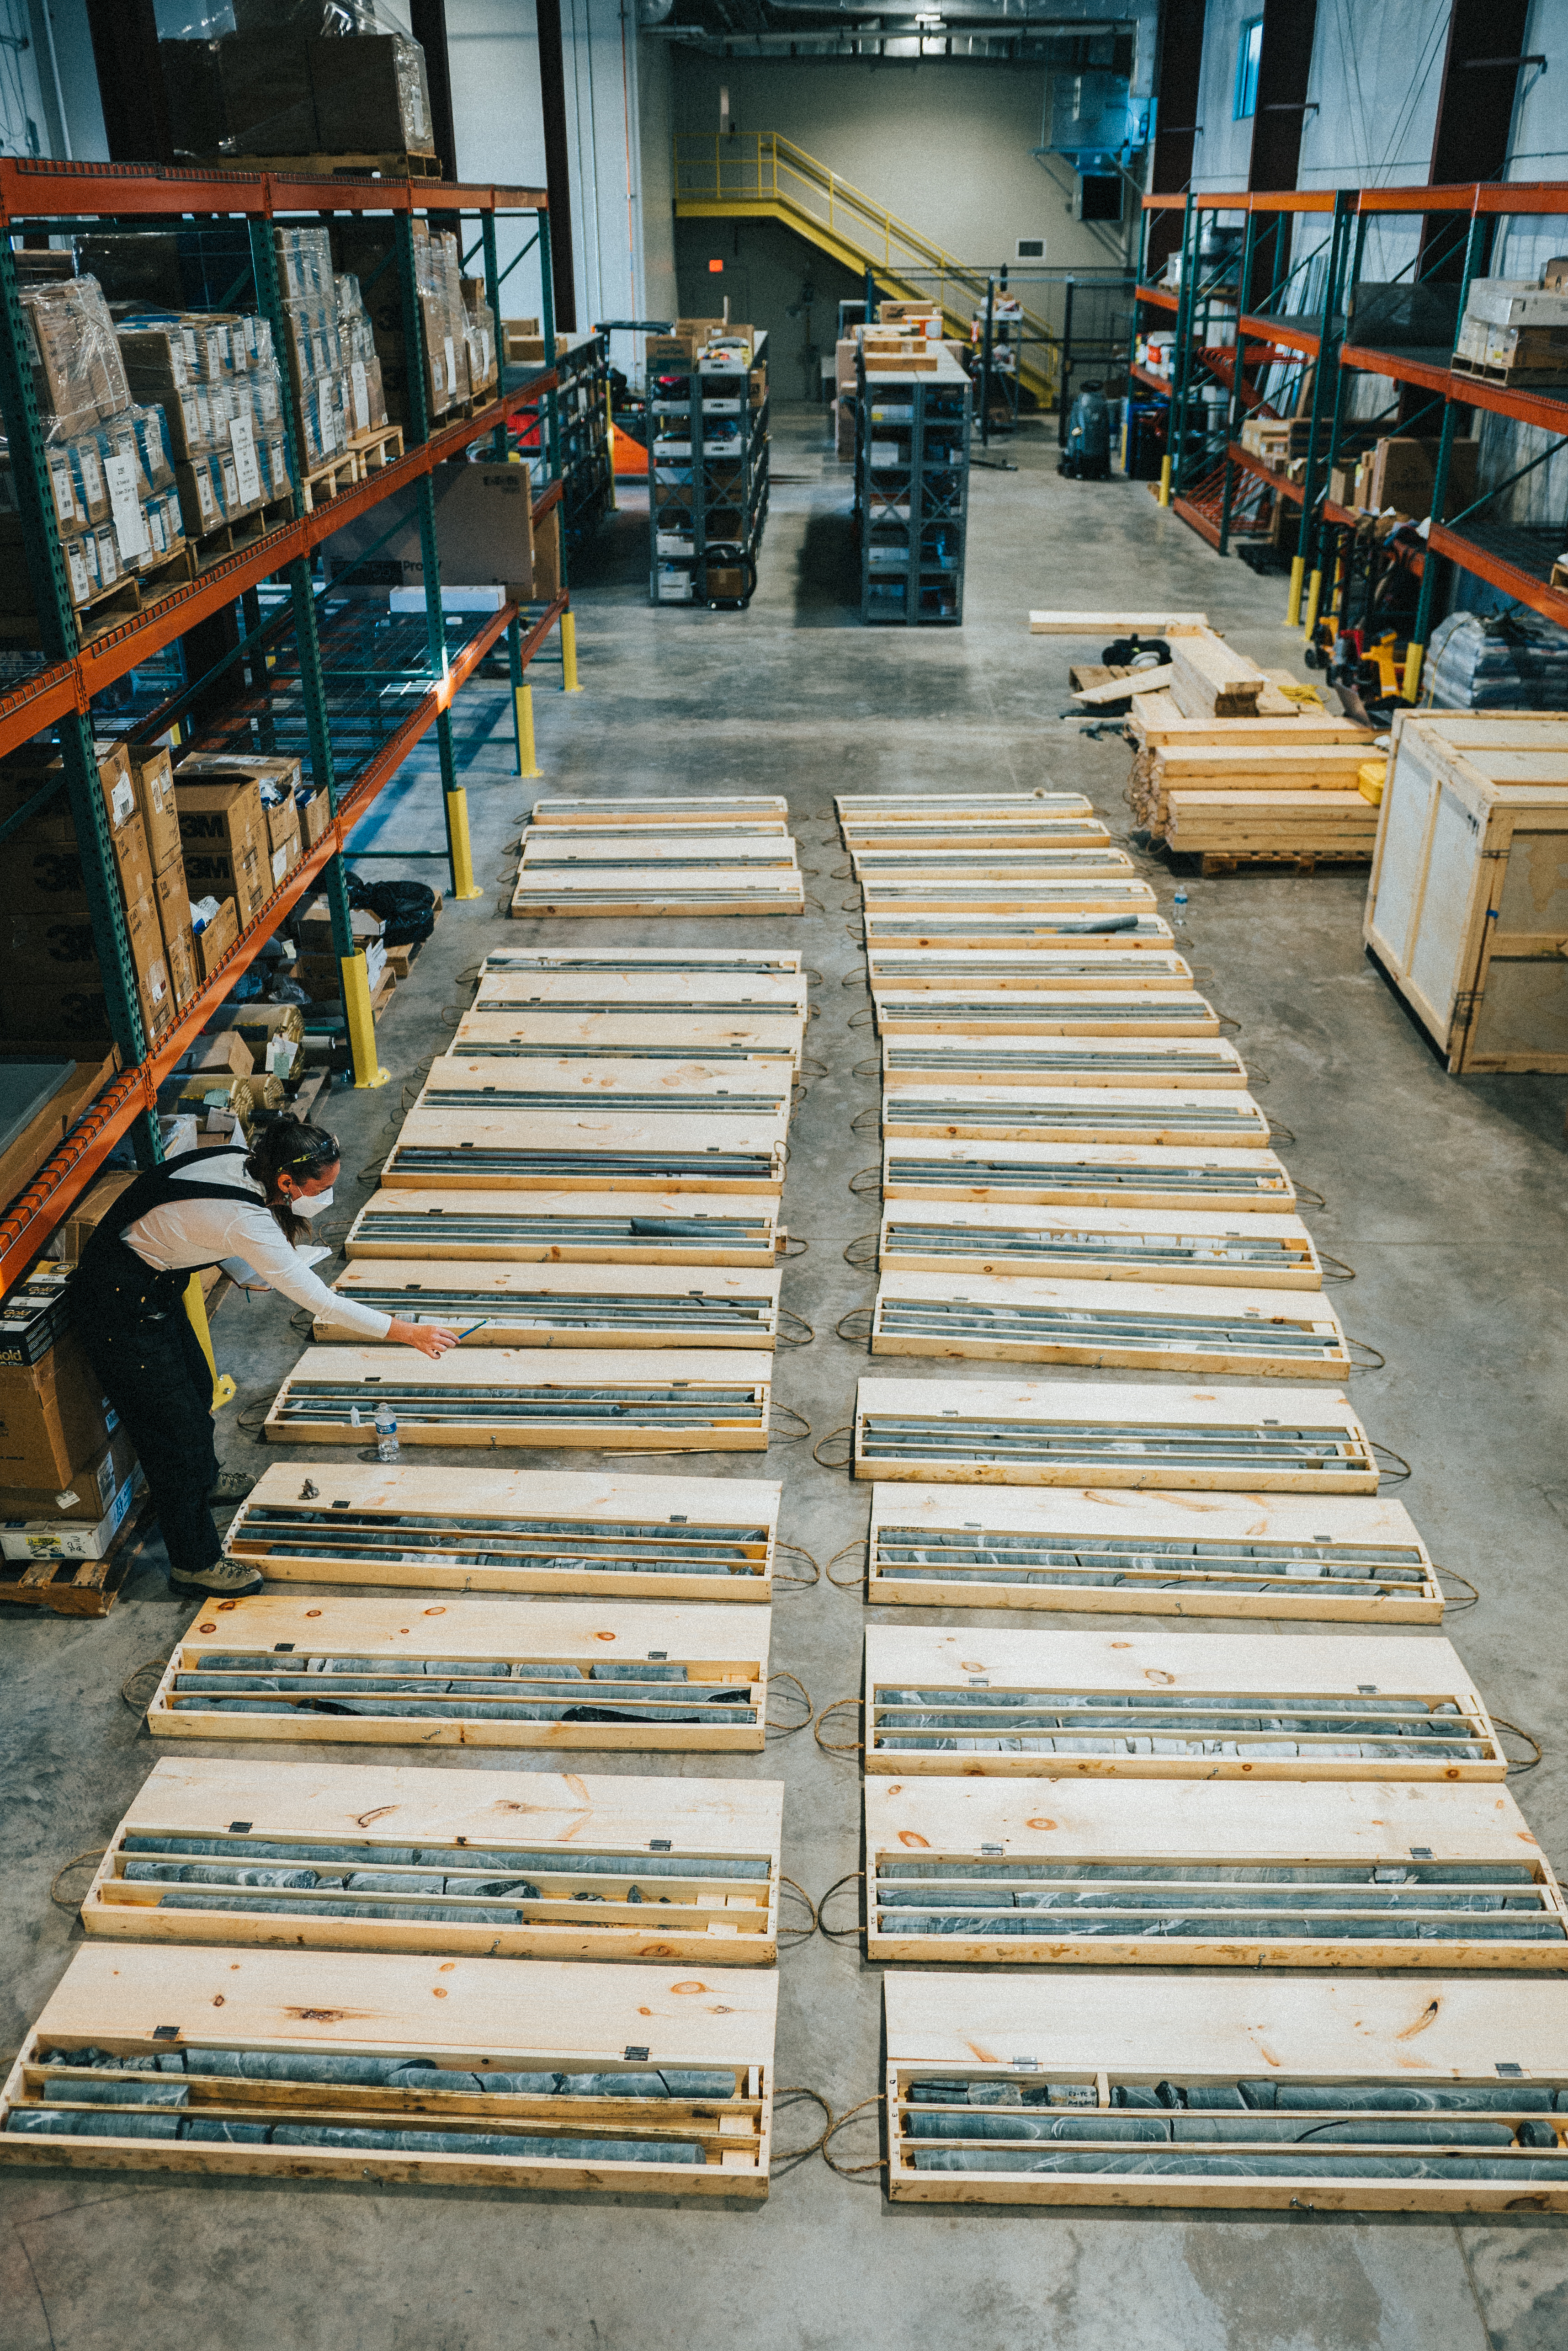 two columns of core sample boxes are laid on the floor of the warehouse